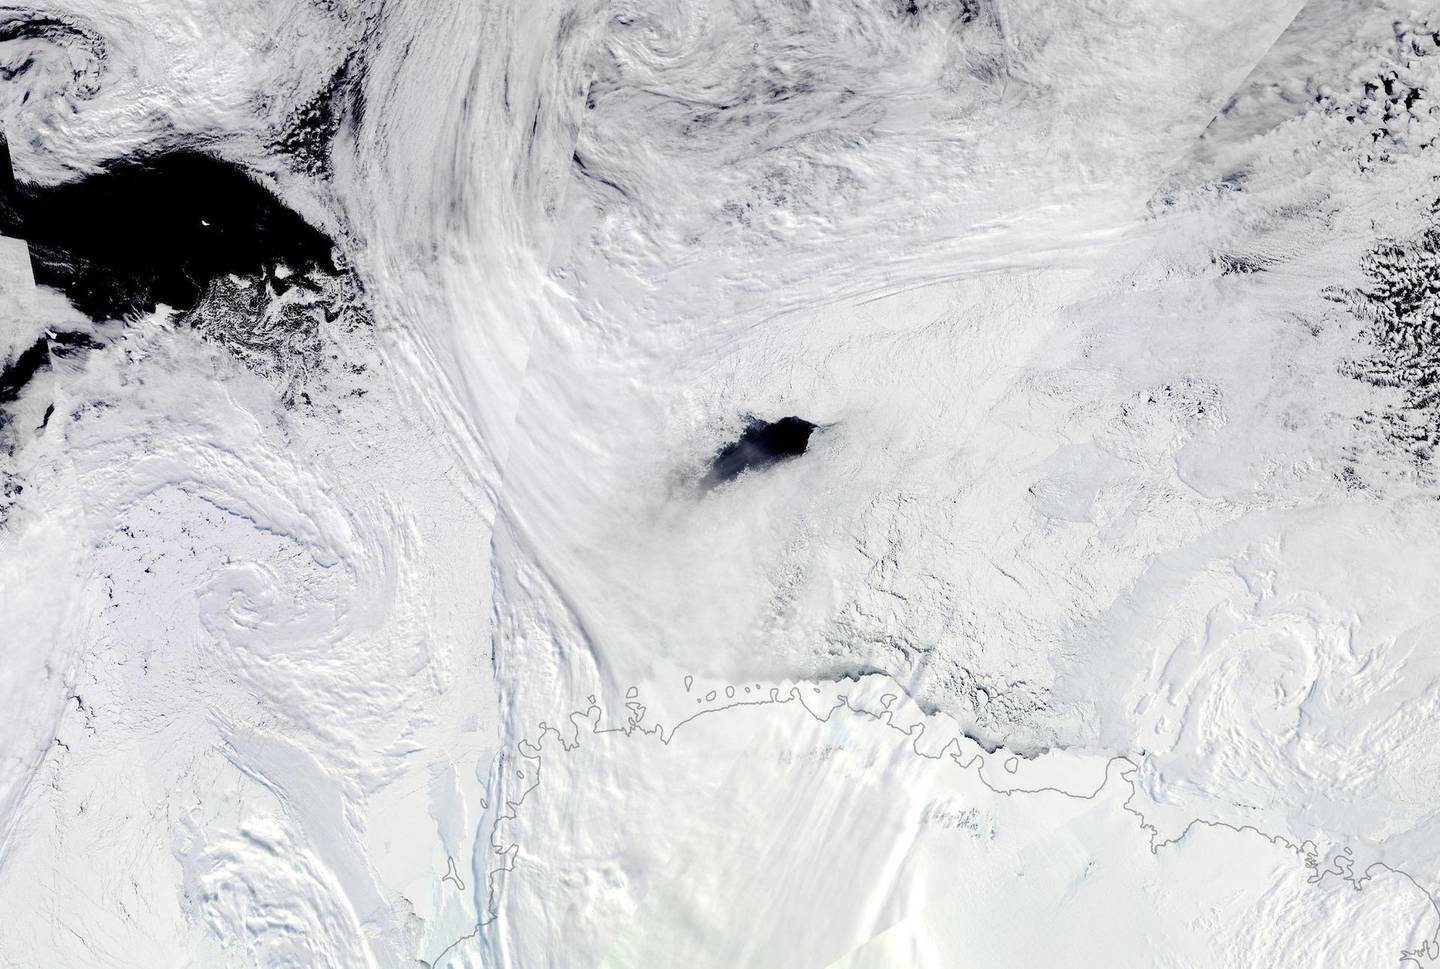 The Maud Rise polynya—named for the submerged mountain-like feature over which it grows—routinely occurs in early spring and occasionally in winter. According to Joey Comiso, an emeritus scientist at NASA’s Goddard Space Flight Center, the shape of the seafloor “causes the ocean current driven by the Weddell Gyre to bring warm water up to the upper layer of the ocean and causes the sea ice to melt.” The Moderate Resolution Imaging Spectroradiometer (MODIS) on NASA’s Terra satellite acquired these images of the Maud Rise polynya in the eastern Weddell Sea on September 25, 2017. Courtesy NASA’s Earth Observatory